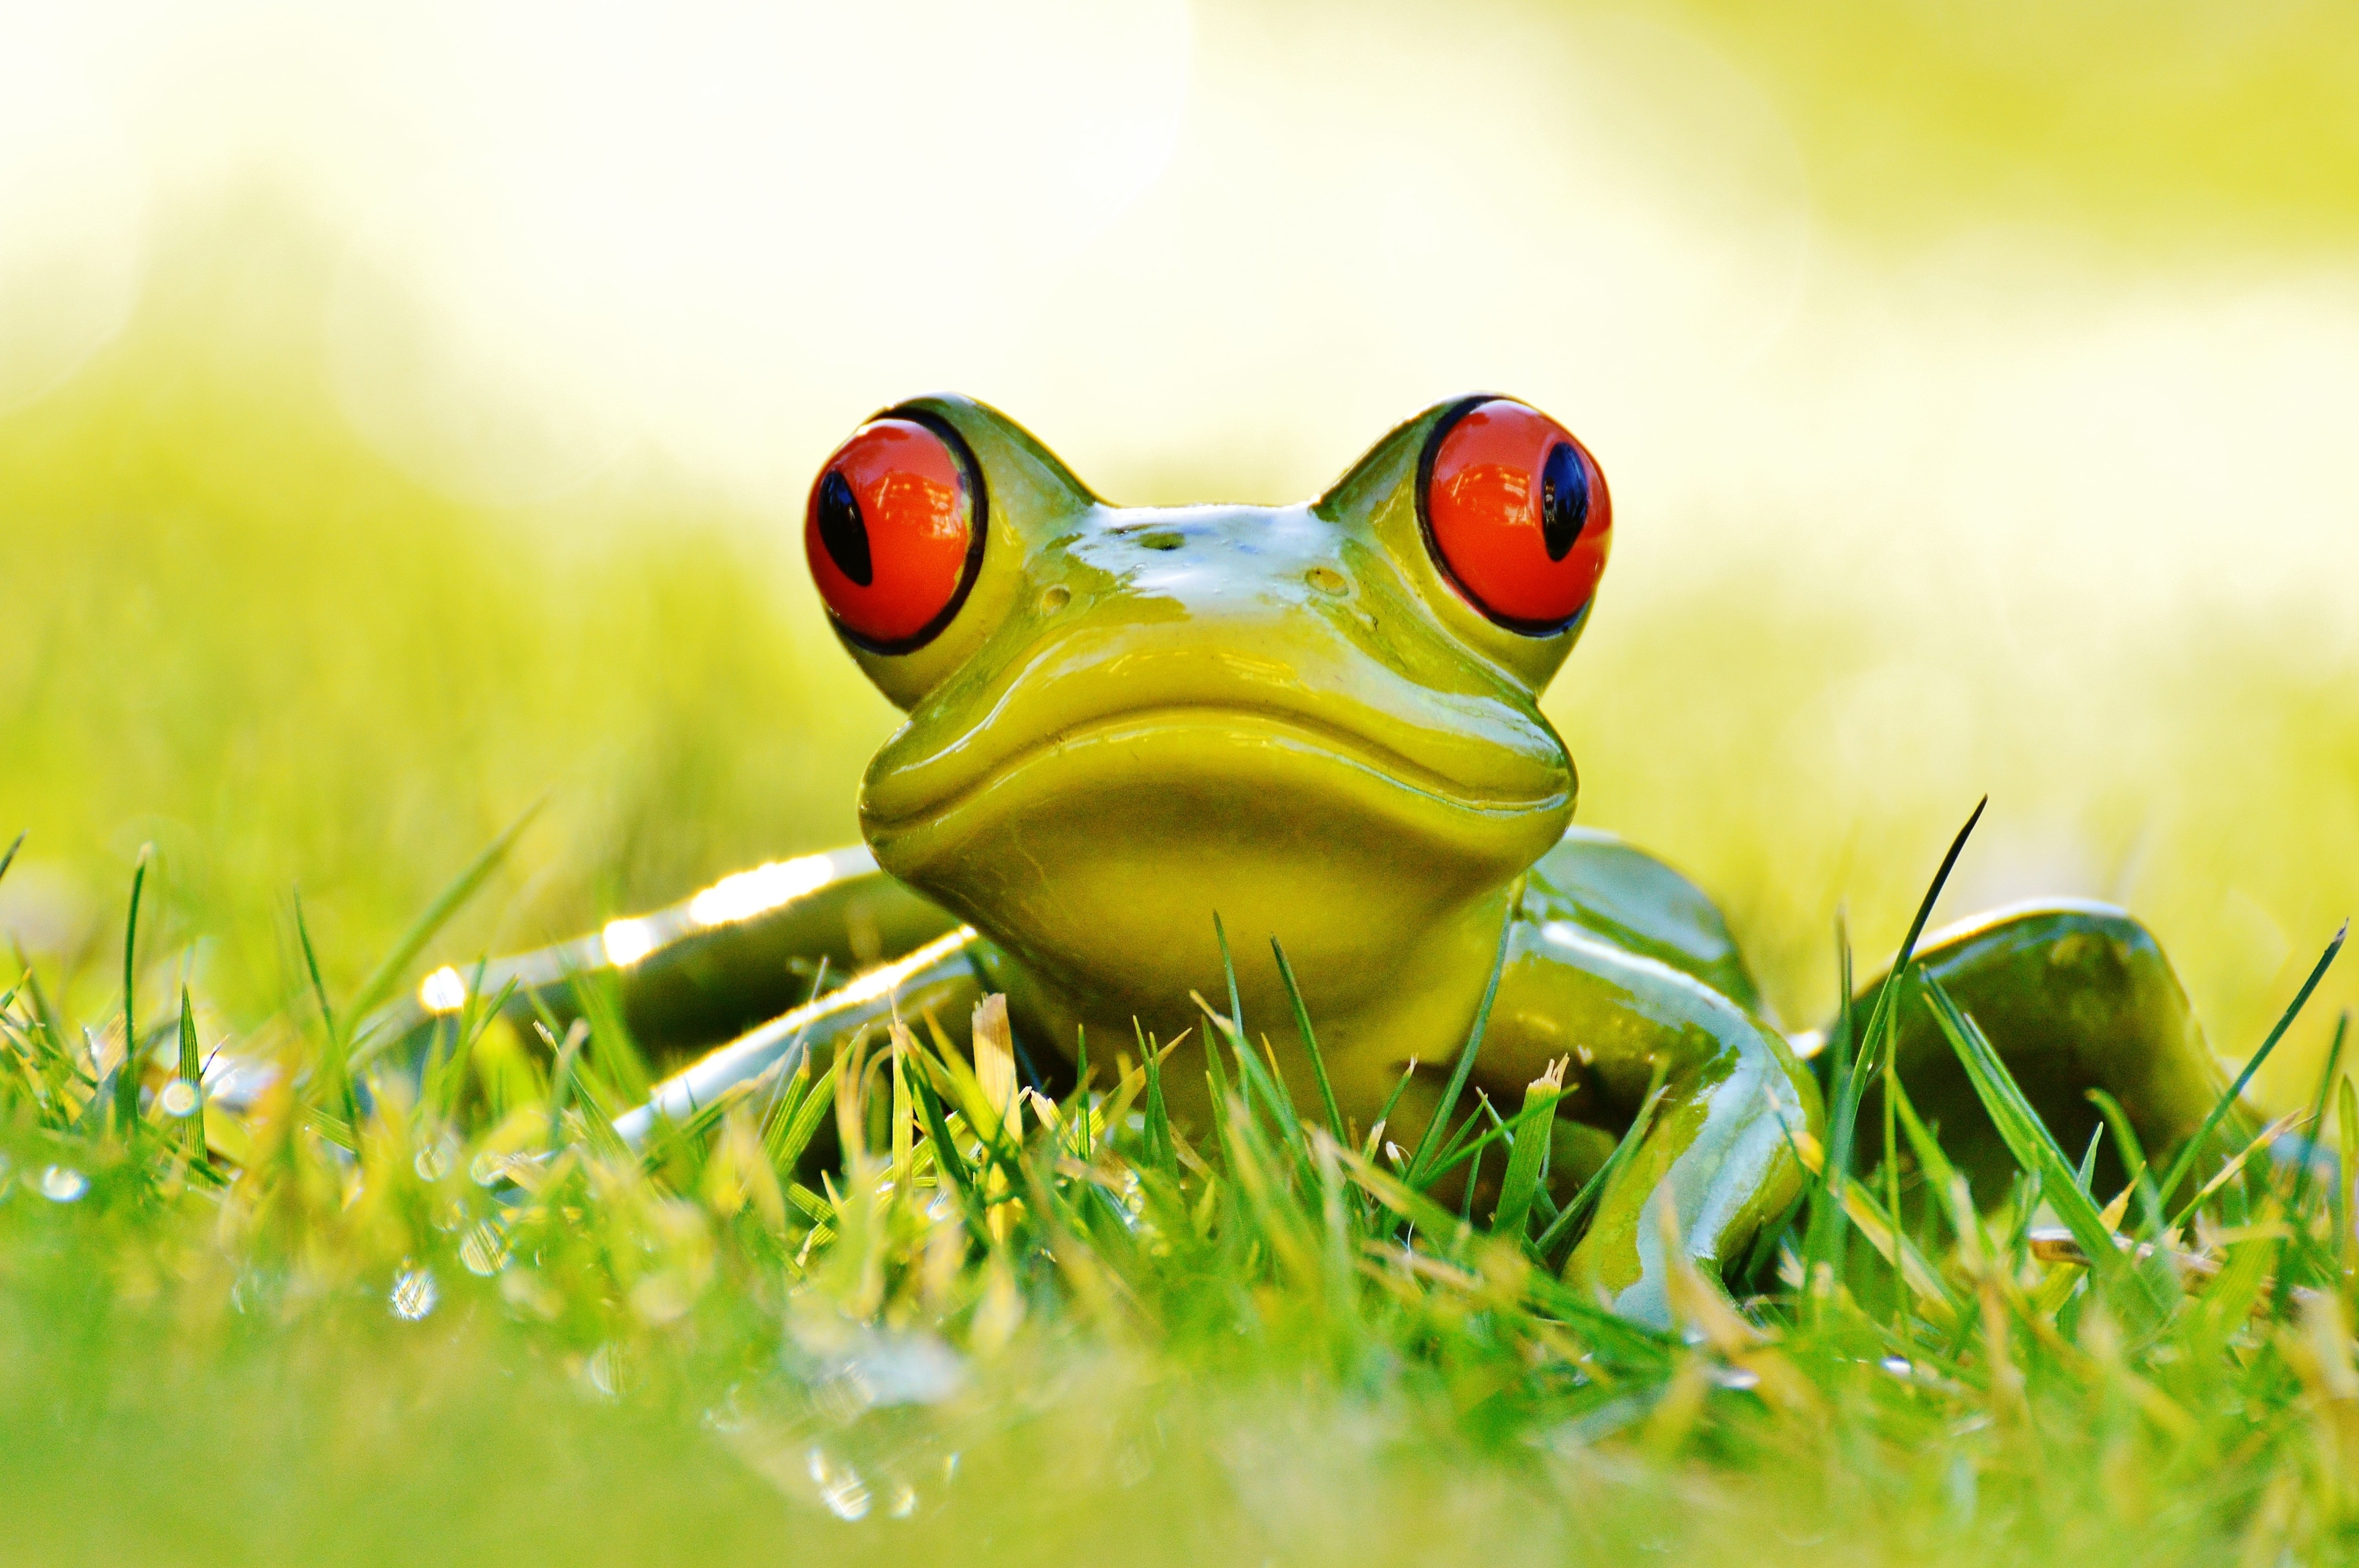 Fig, Meadow, Cute, Frog, Green, Animal, grass, one animal